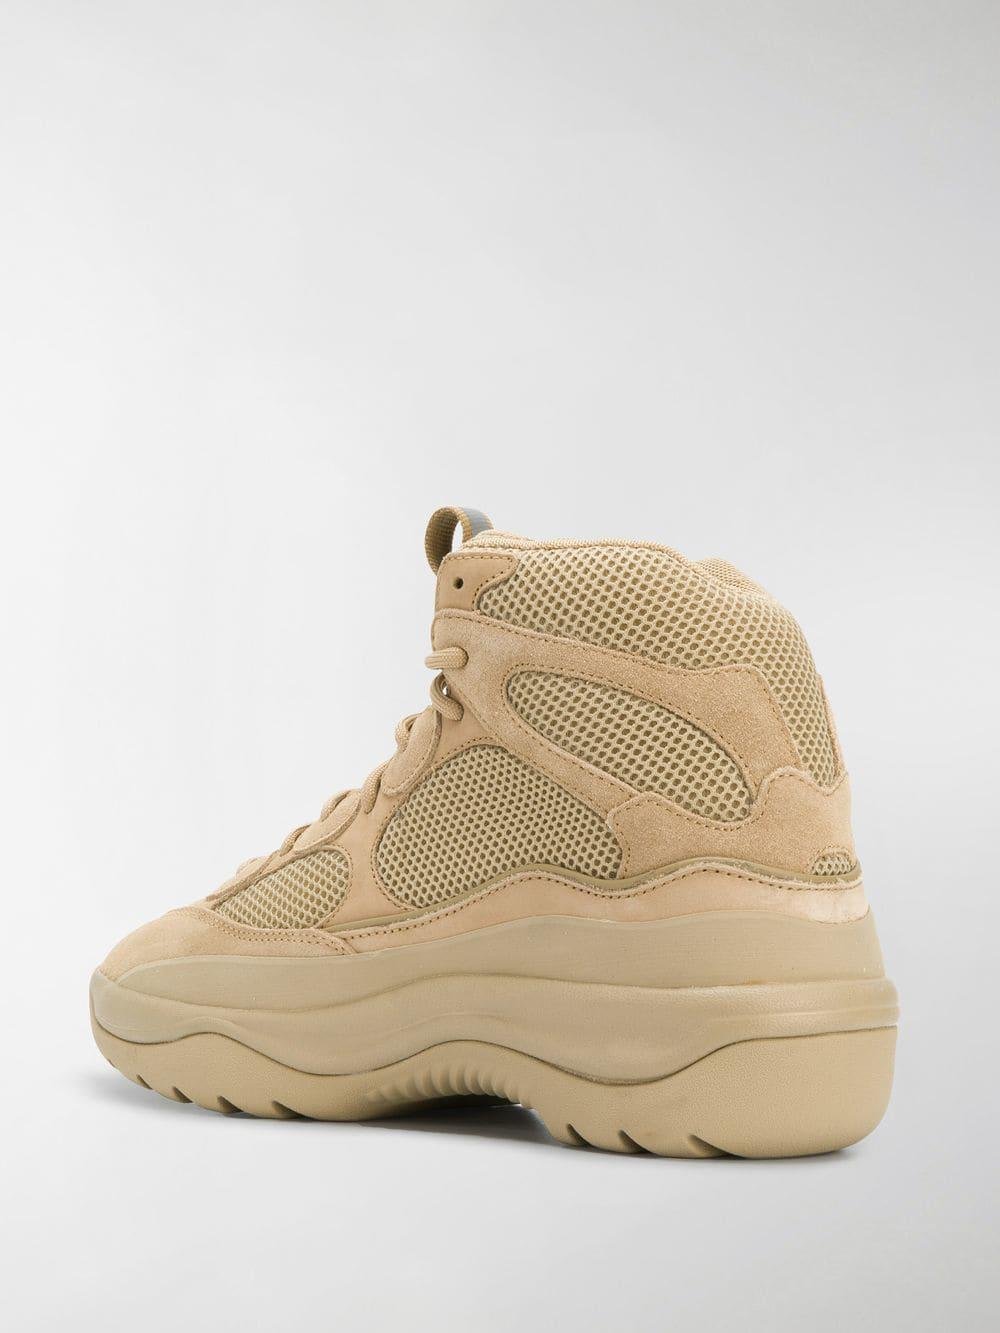 yeezy taupe boots